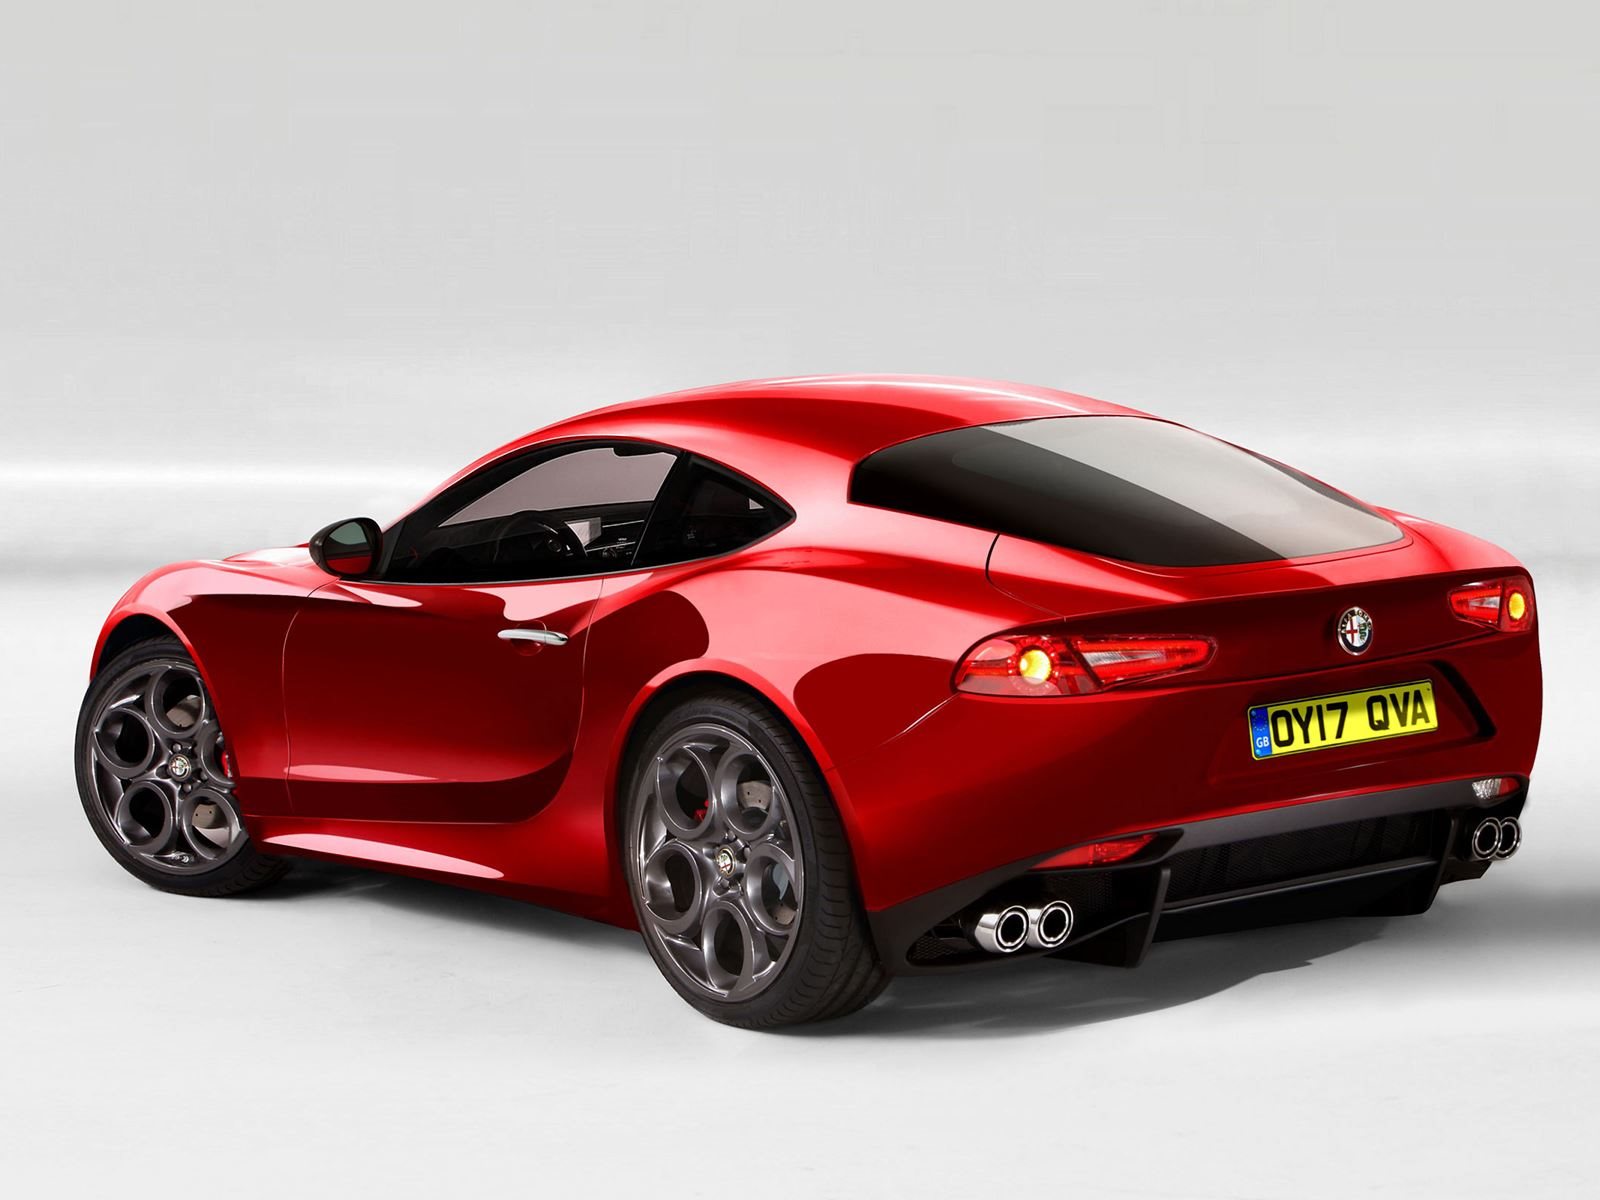 alfa-romeo-6c-sports-coupe-could-crush-the-jaguar-f-type-carbuzz